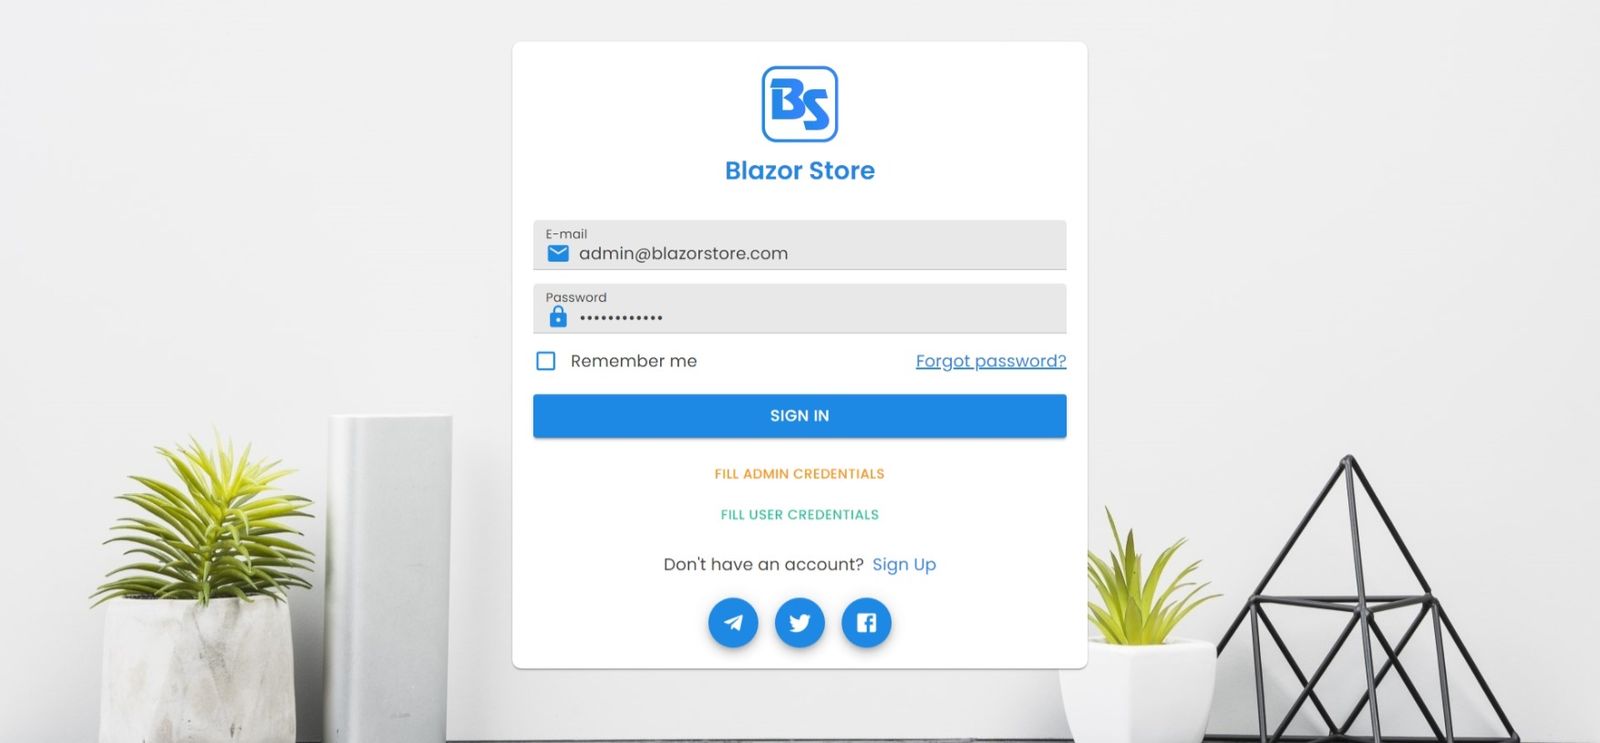 Blazor Store - Mobile PWA and Site Templates with Powerful Built-in Functions - 5